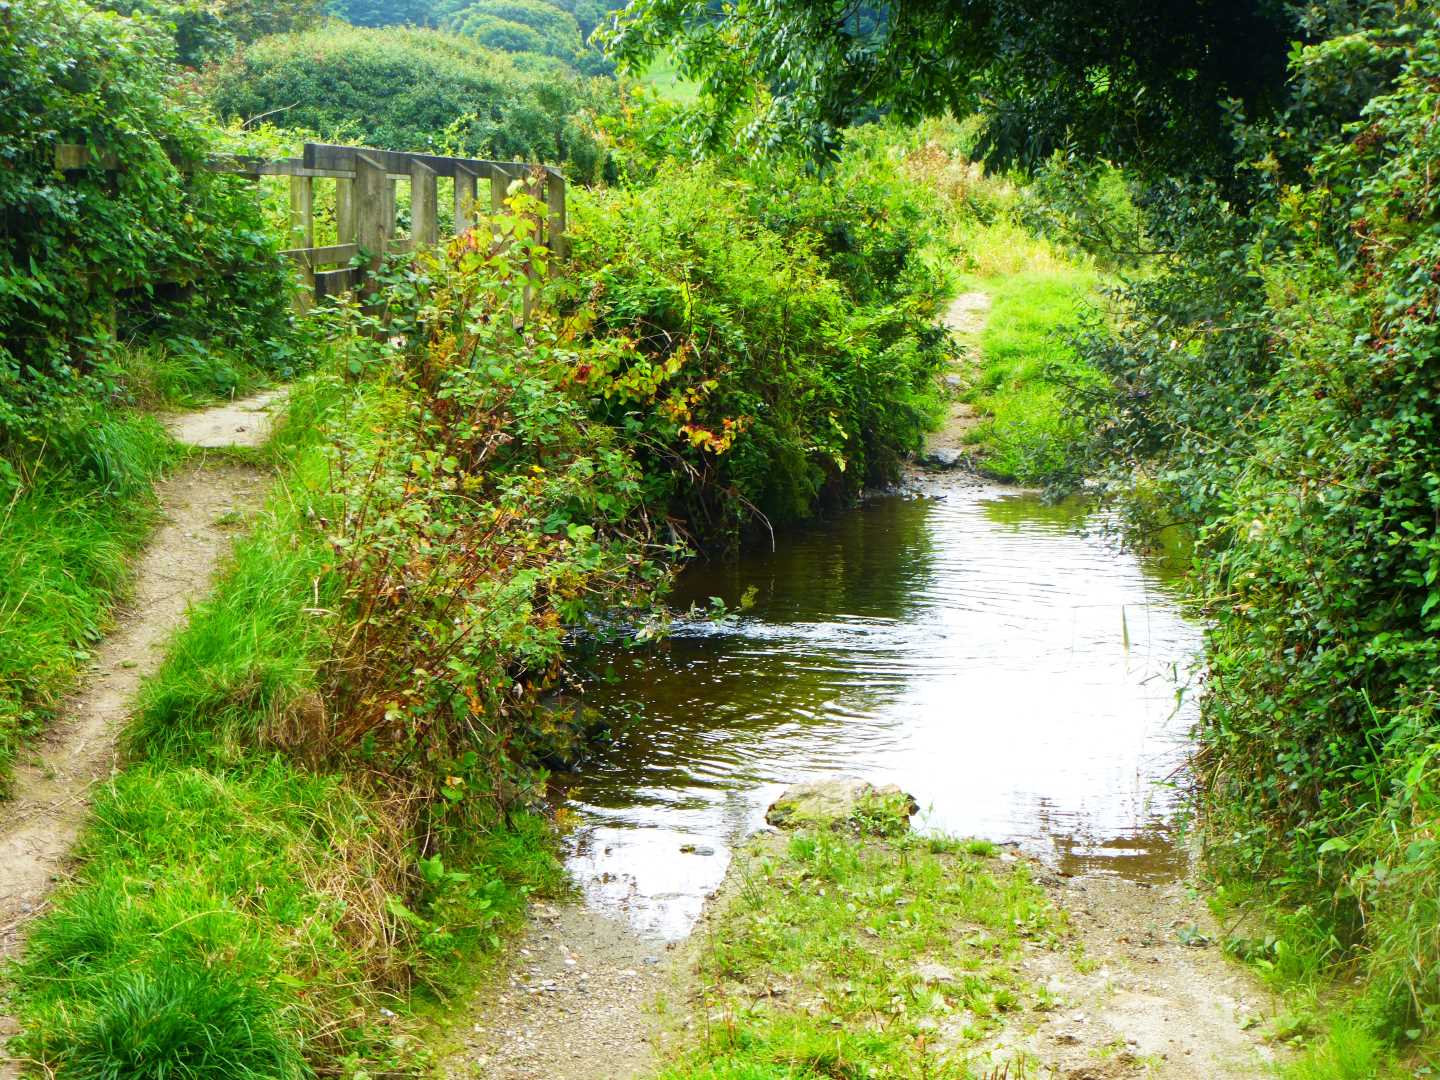 A small ford in a stream surrounded by ferms and other vegetation